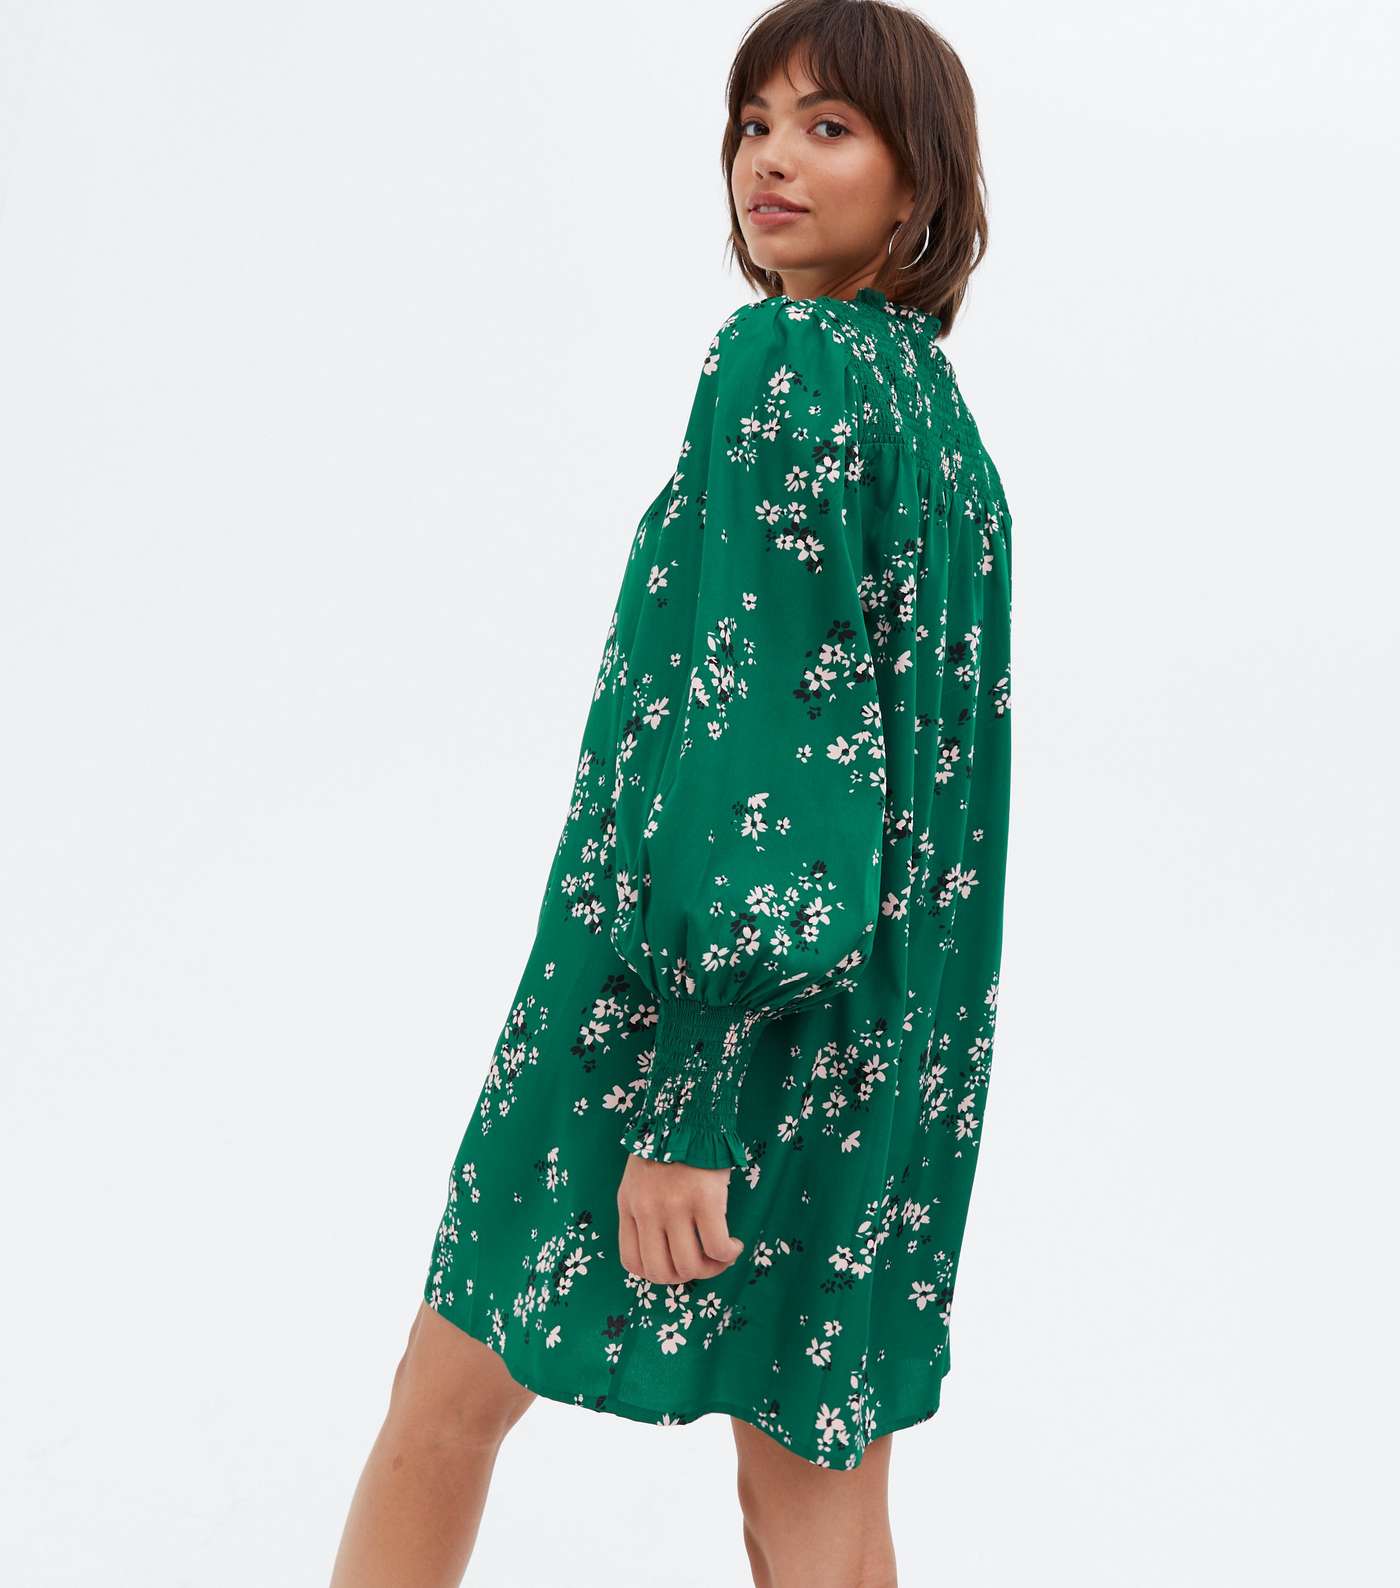 Green Floral Shirred Frill High Neck Mini Dress Image 4